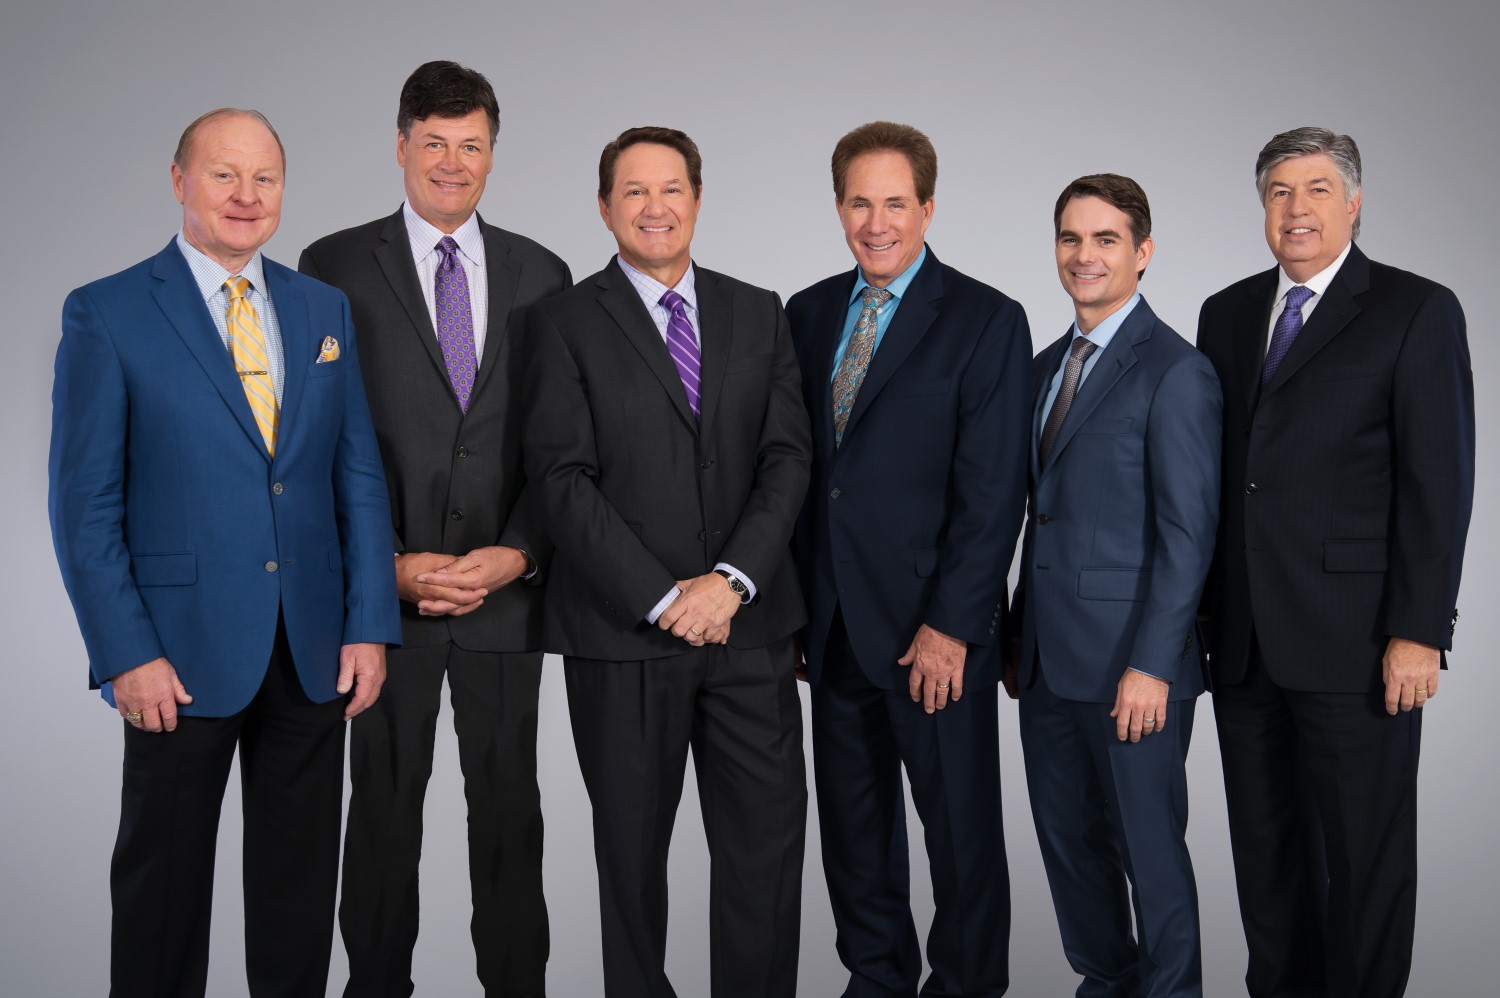 FOX NASCAR OnAir Team Delivers Combined 200 Years of Daytona 500